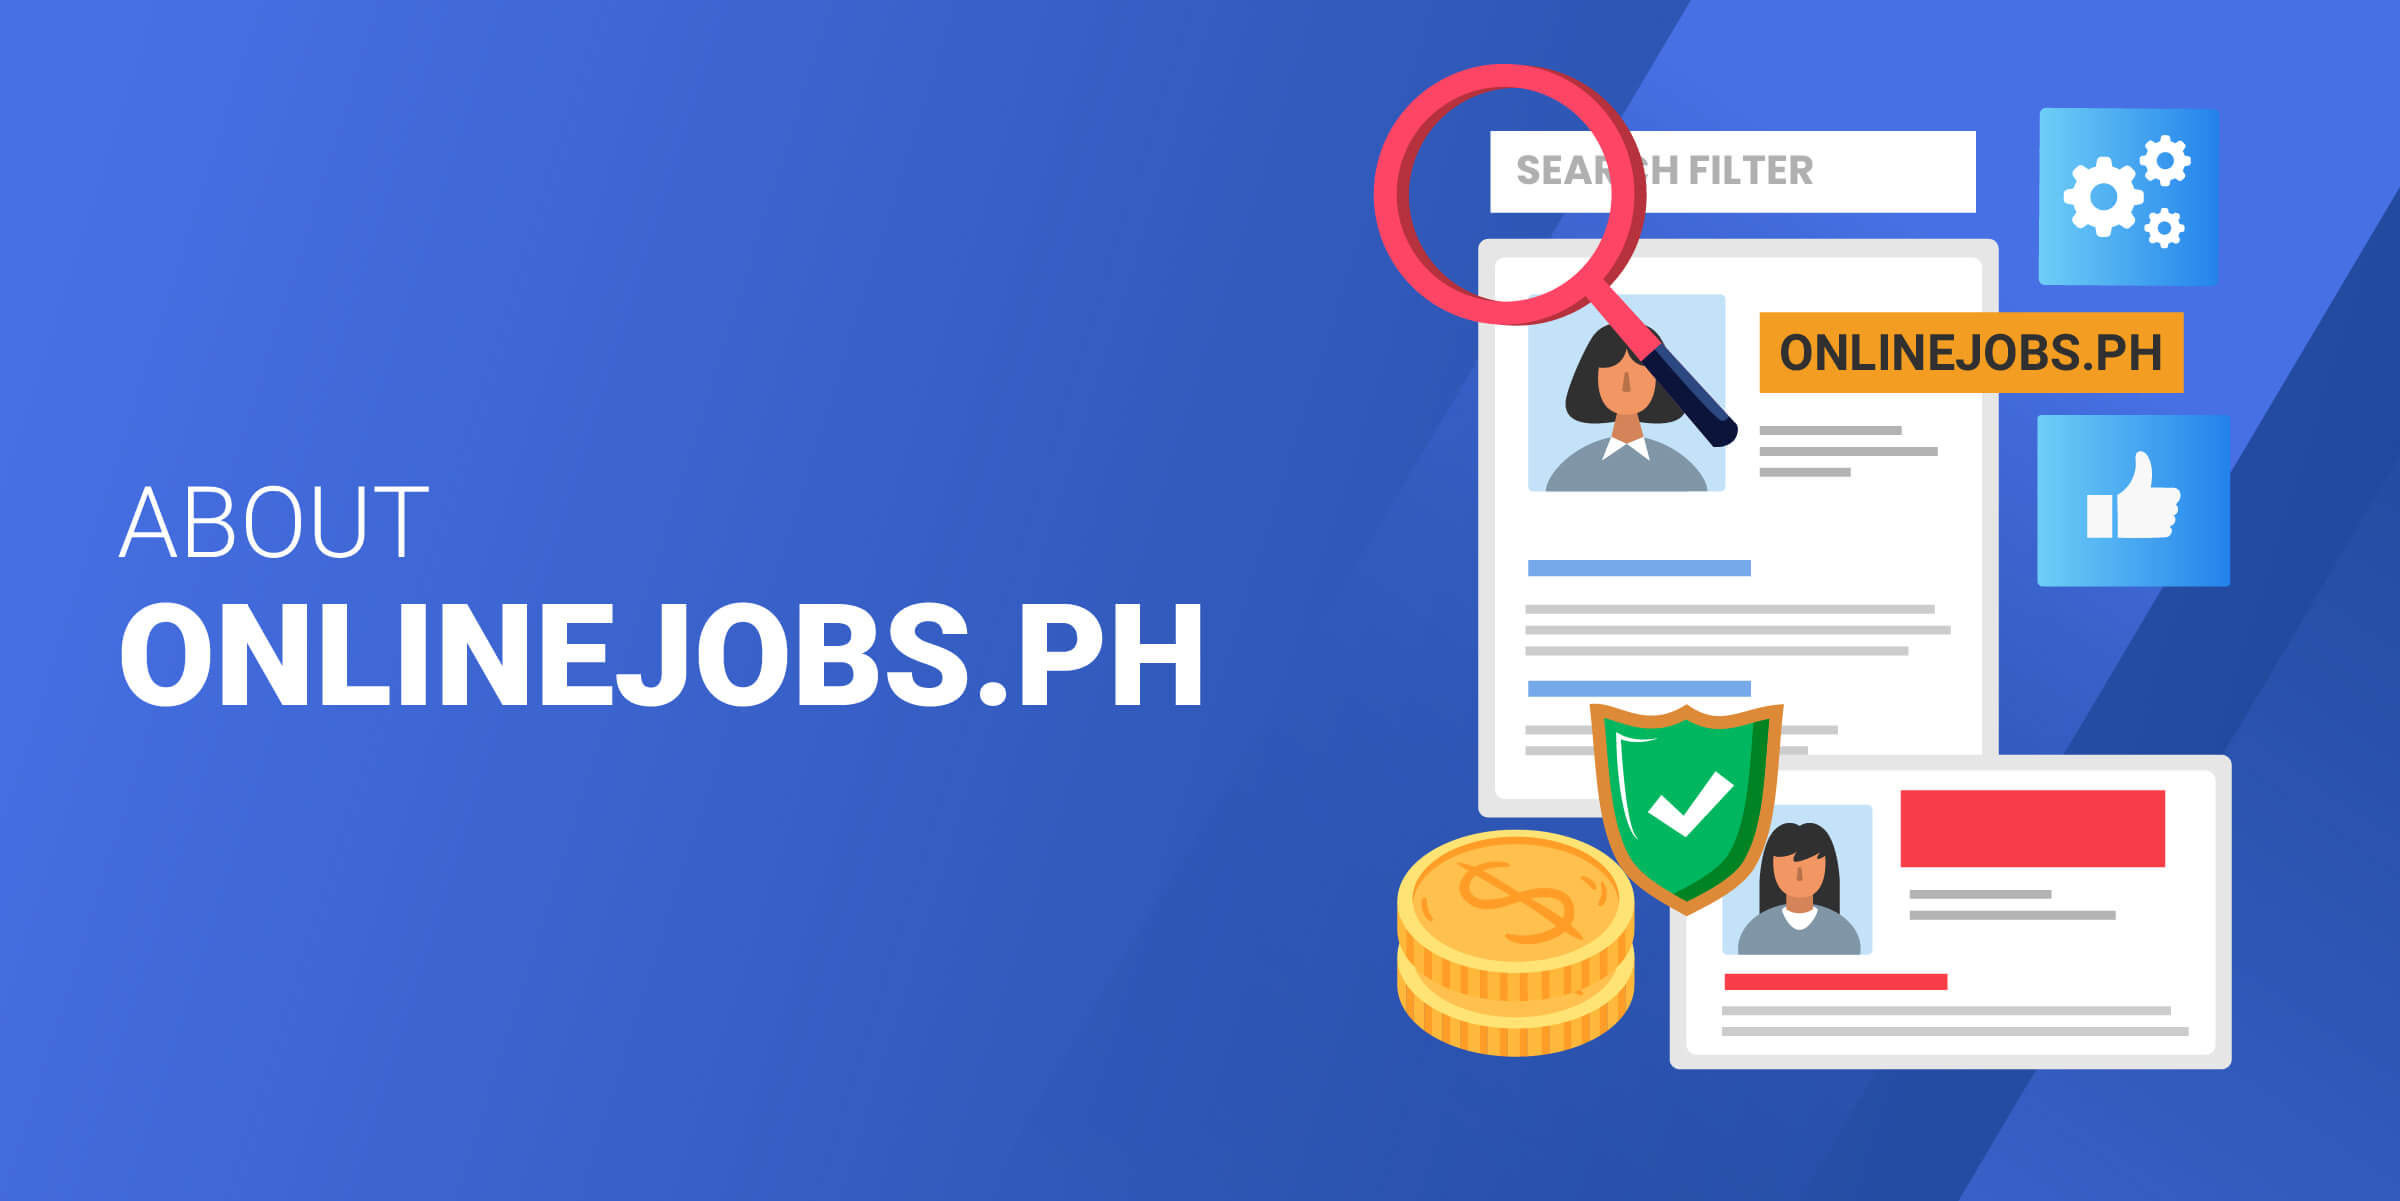 About OnlineJobs.PH